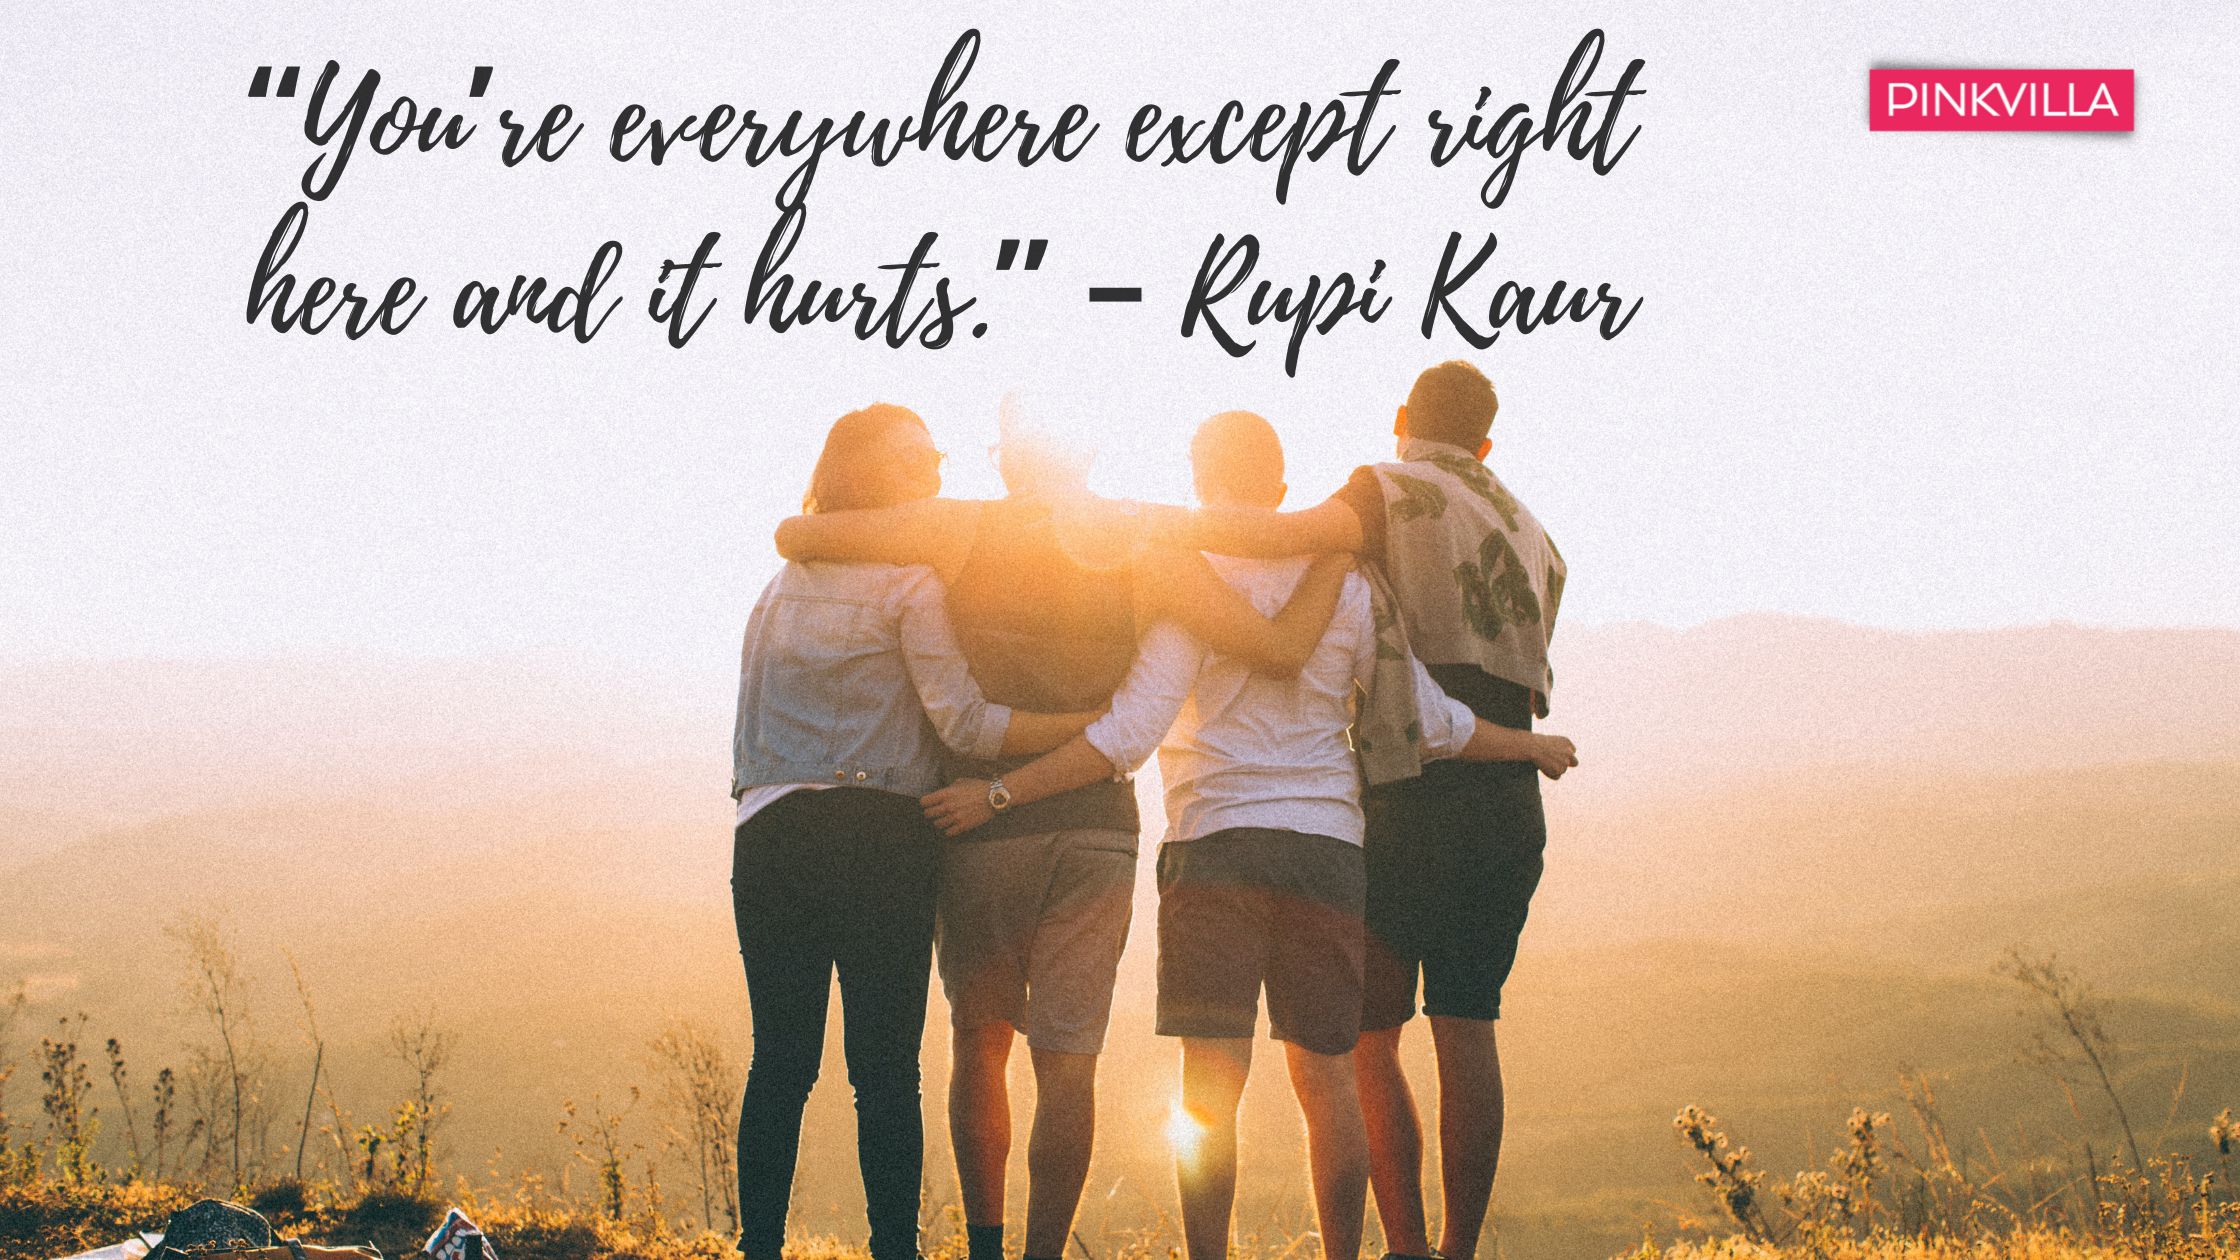 100+ online friendship quotes for long-distance friends 